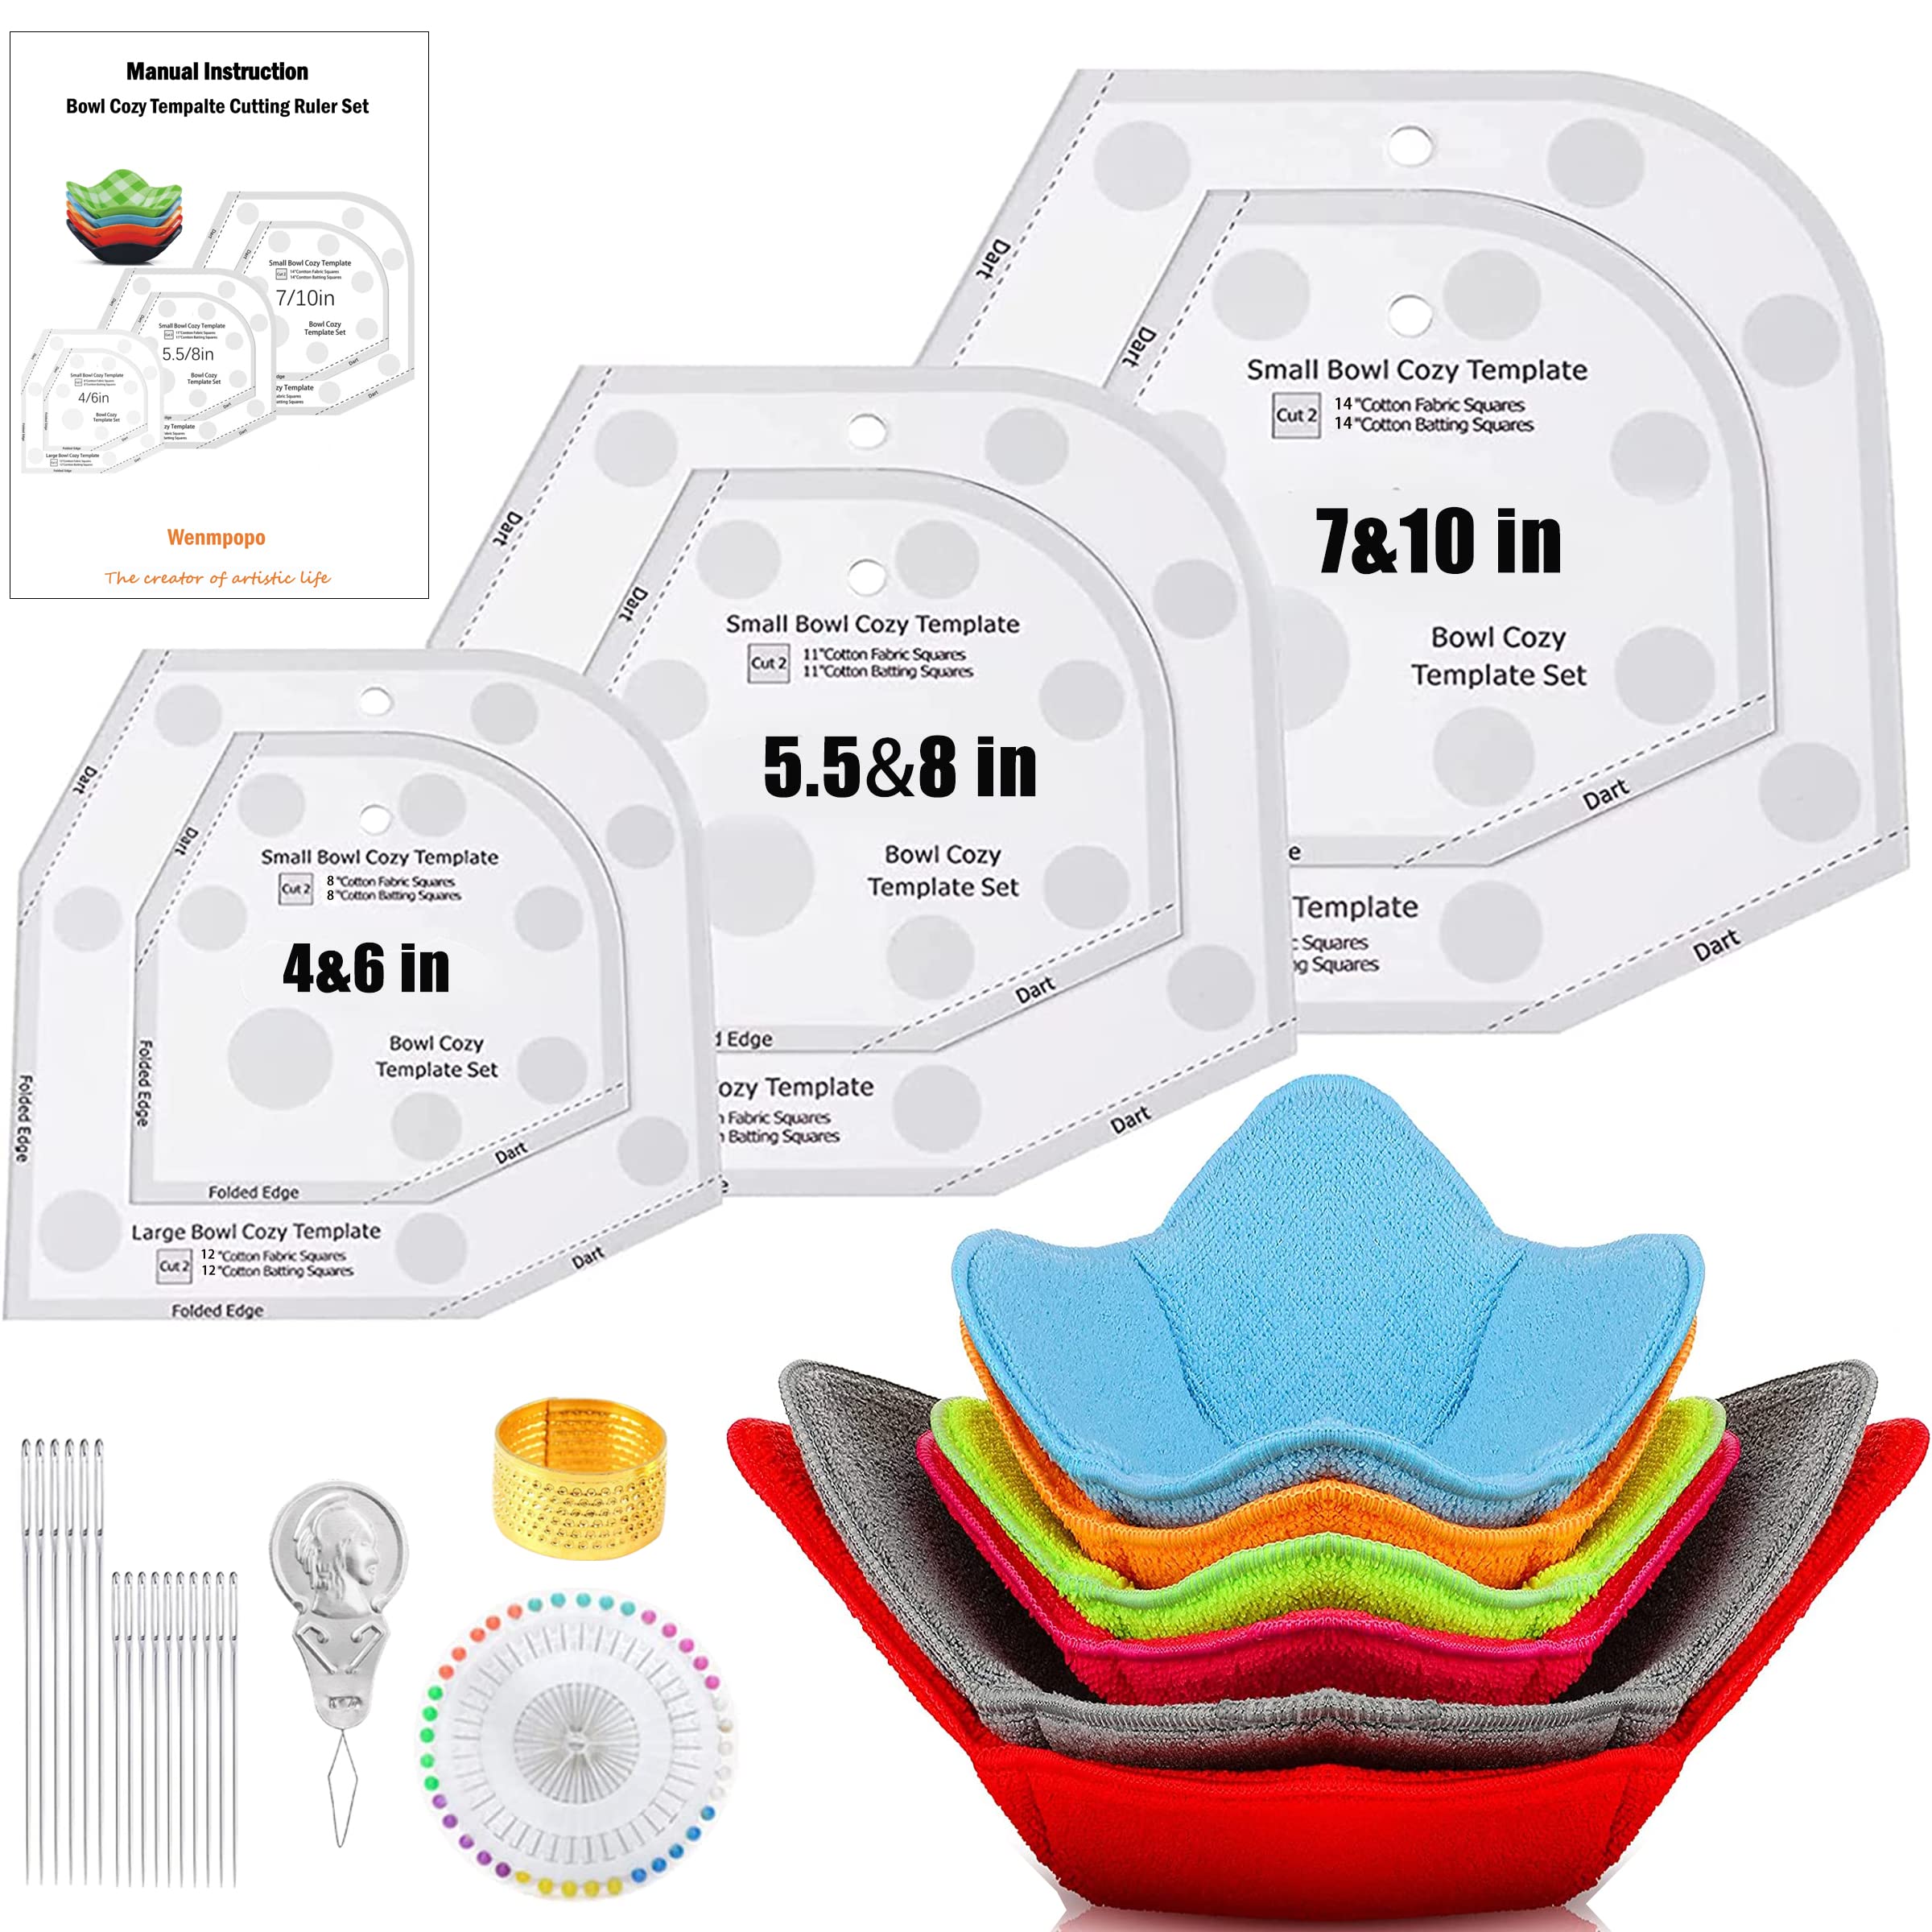 Wenmpopo Bowl Cozy Pattern Template, Bowl Cozy Template Cutting Ruler  Set,DIY Kitchen Art Craft Sewing